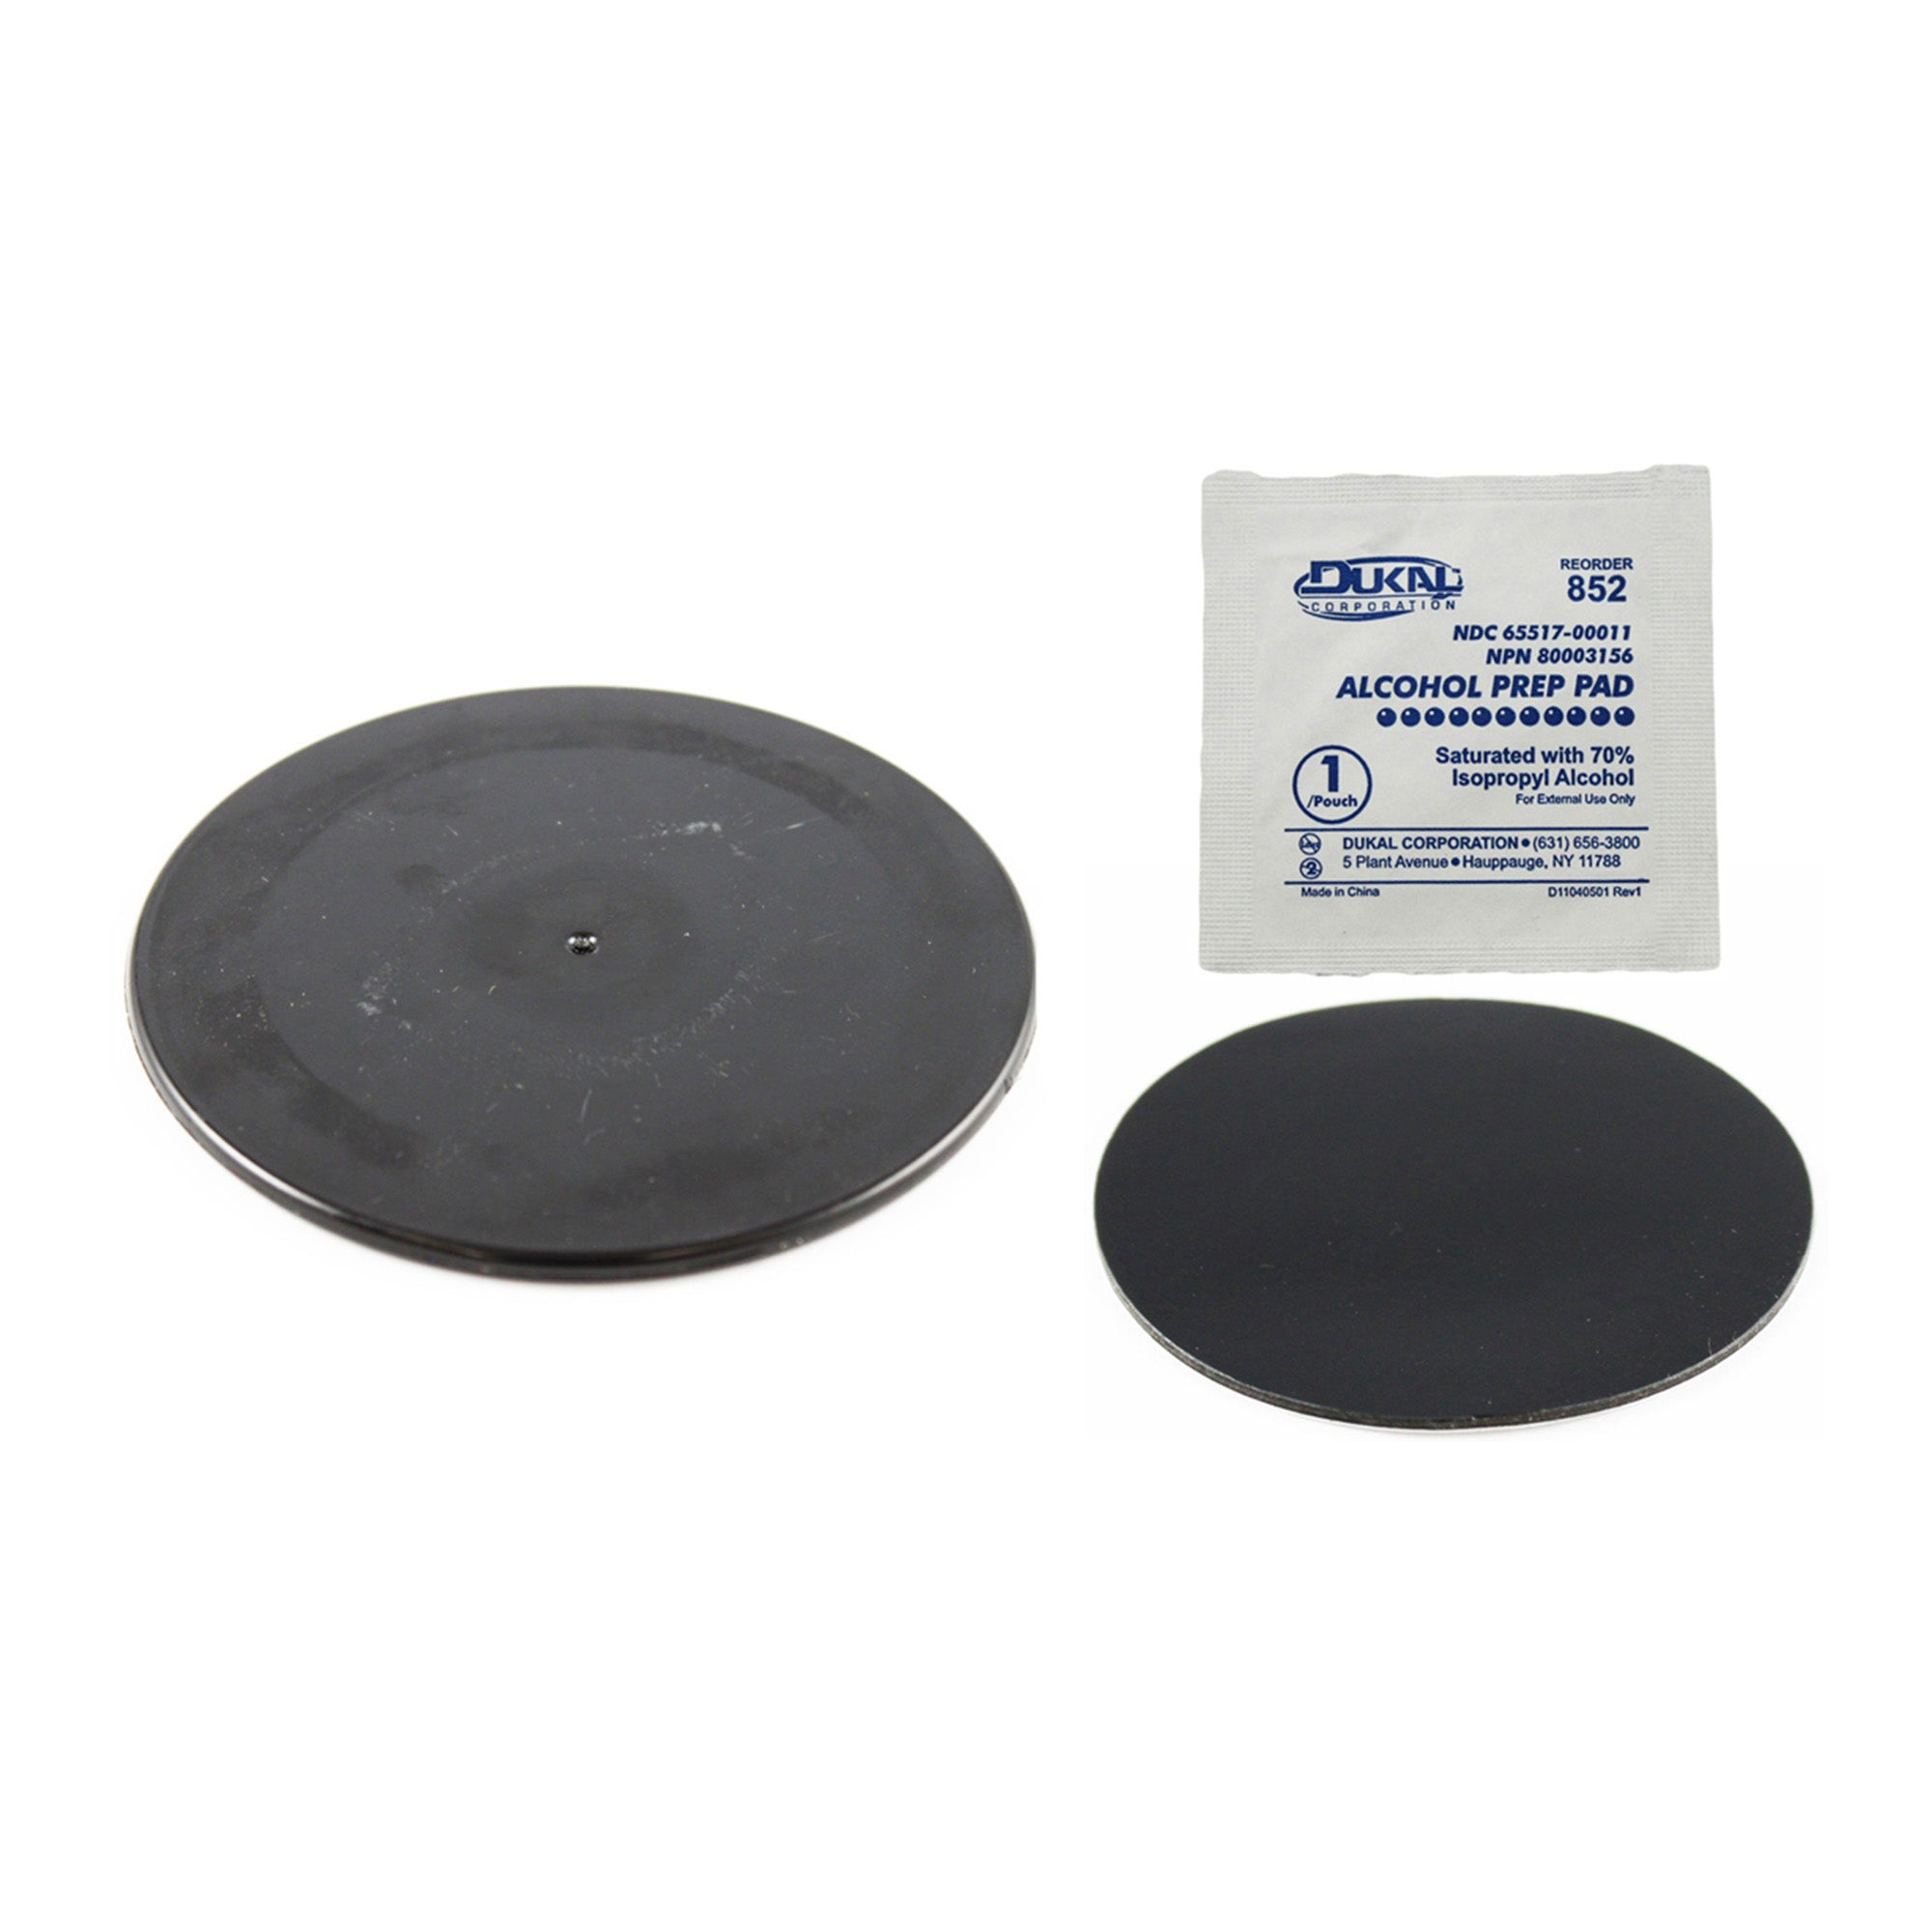 RAM Black 3.5" Adhesive Plate for Suction Cups